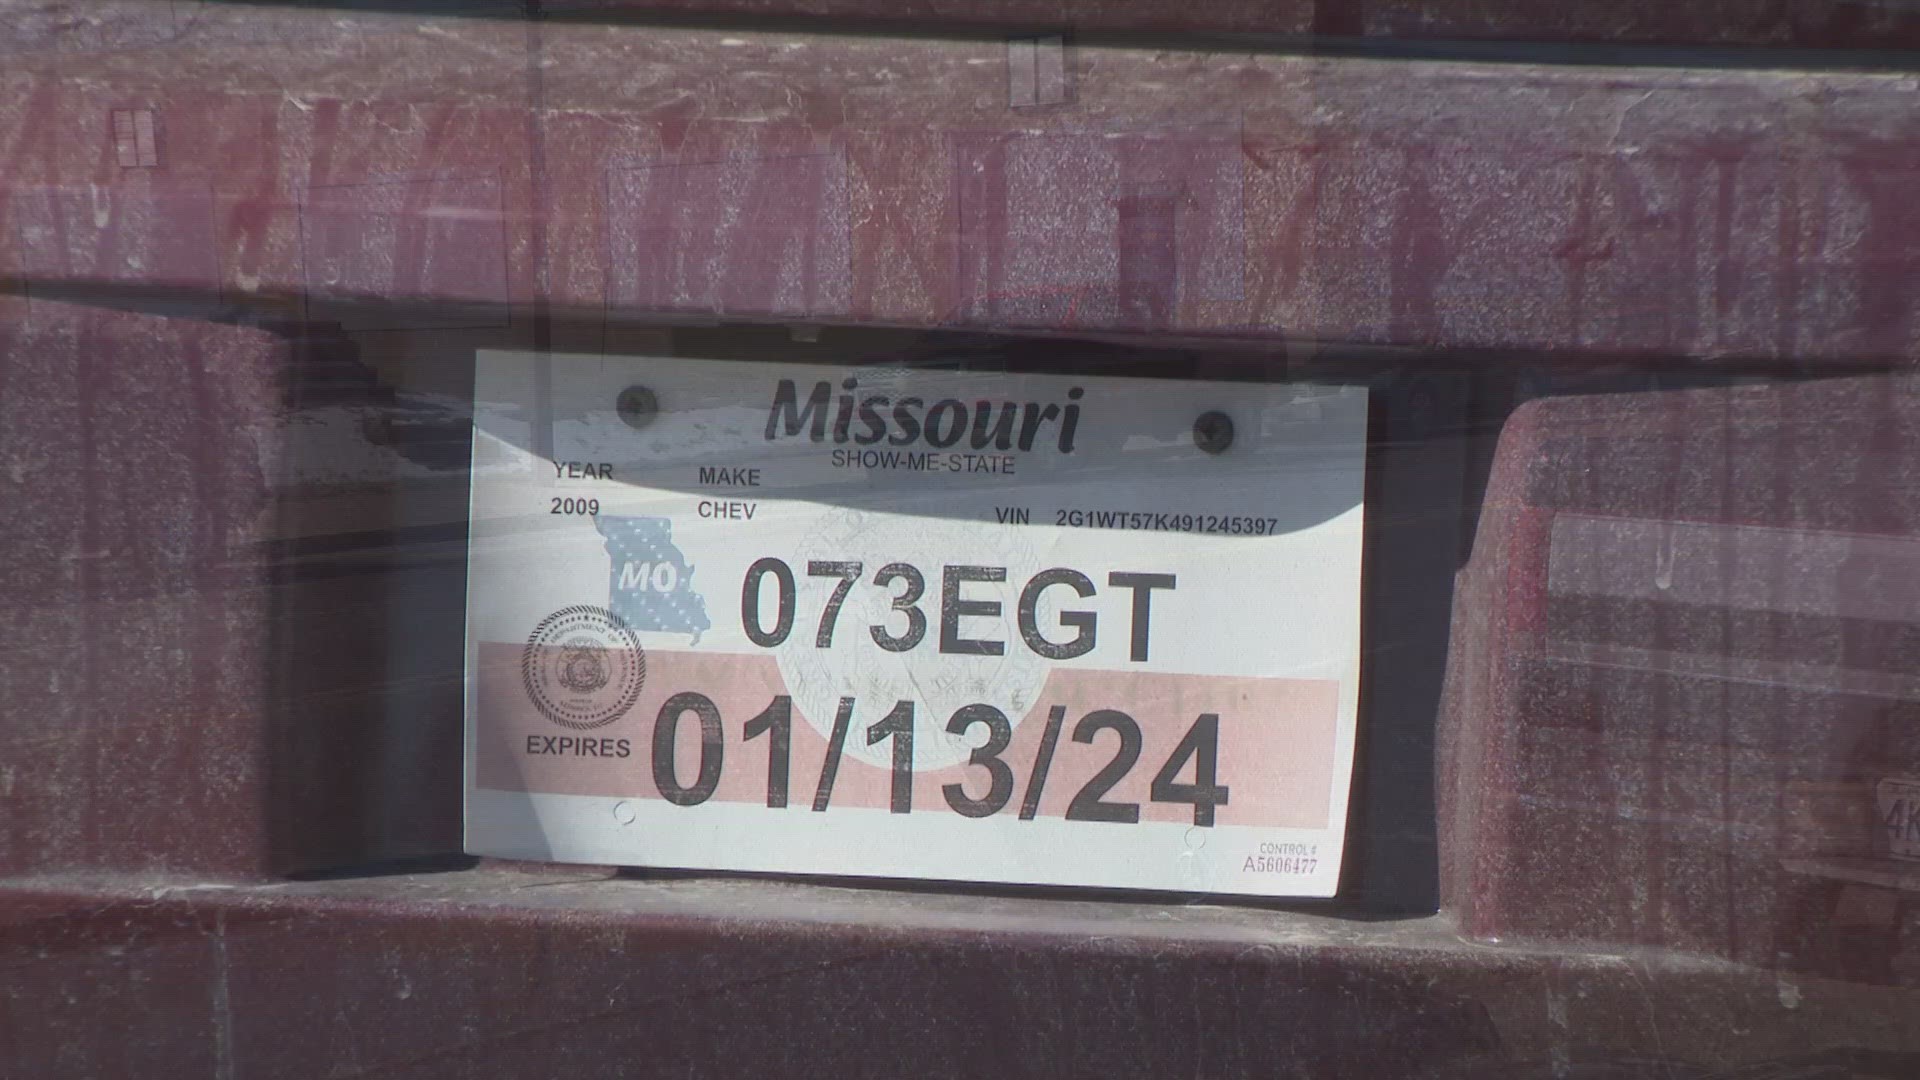 Lawmakers are focused on addressing expired temporary tags. It's a problem that has rapidly increased in our area.